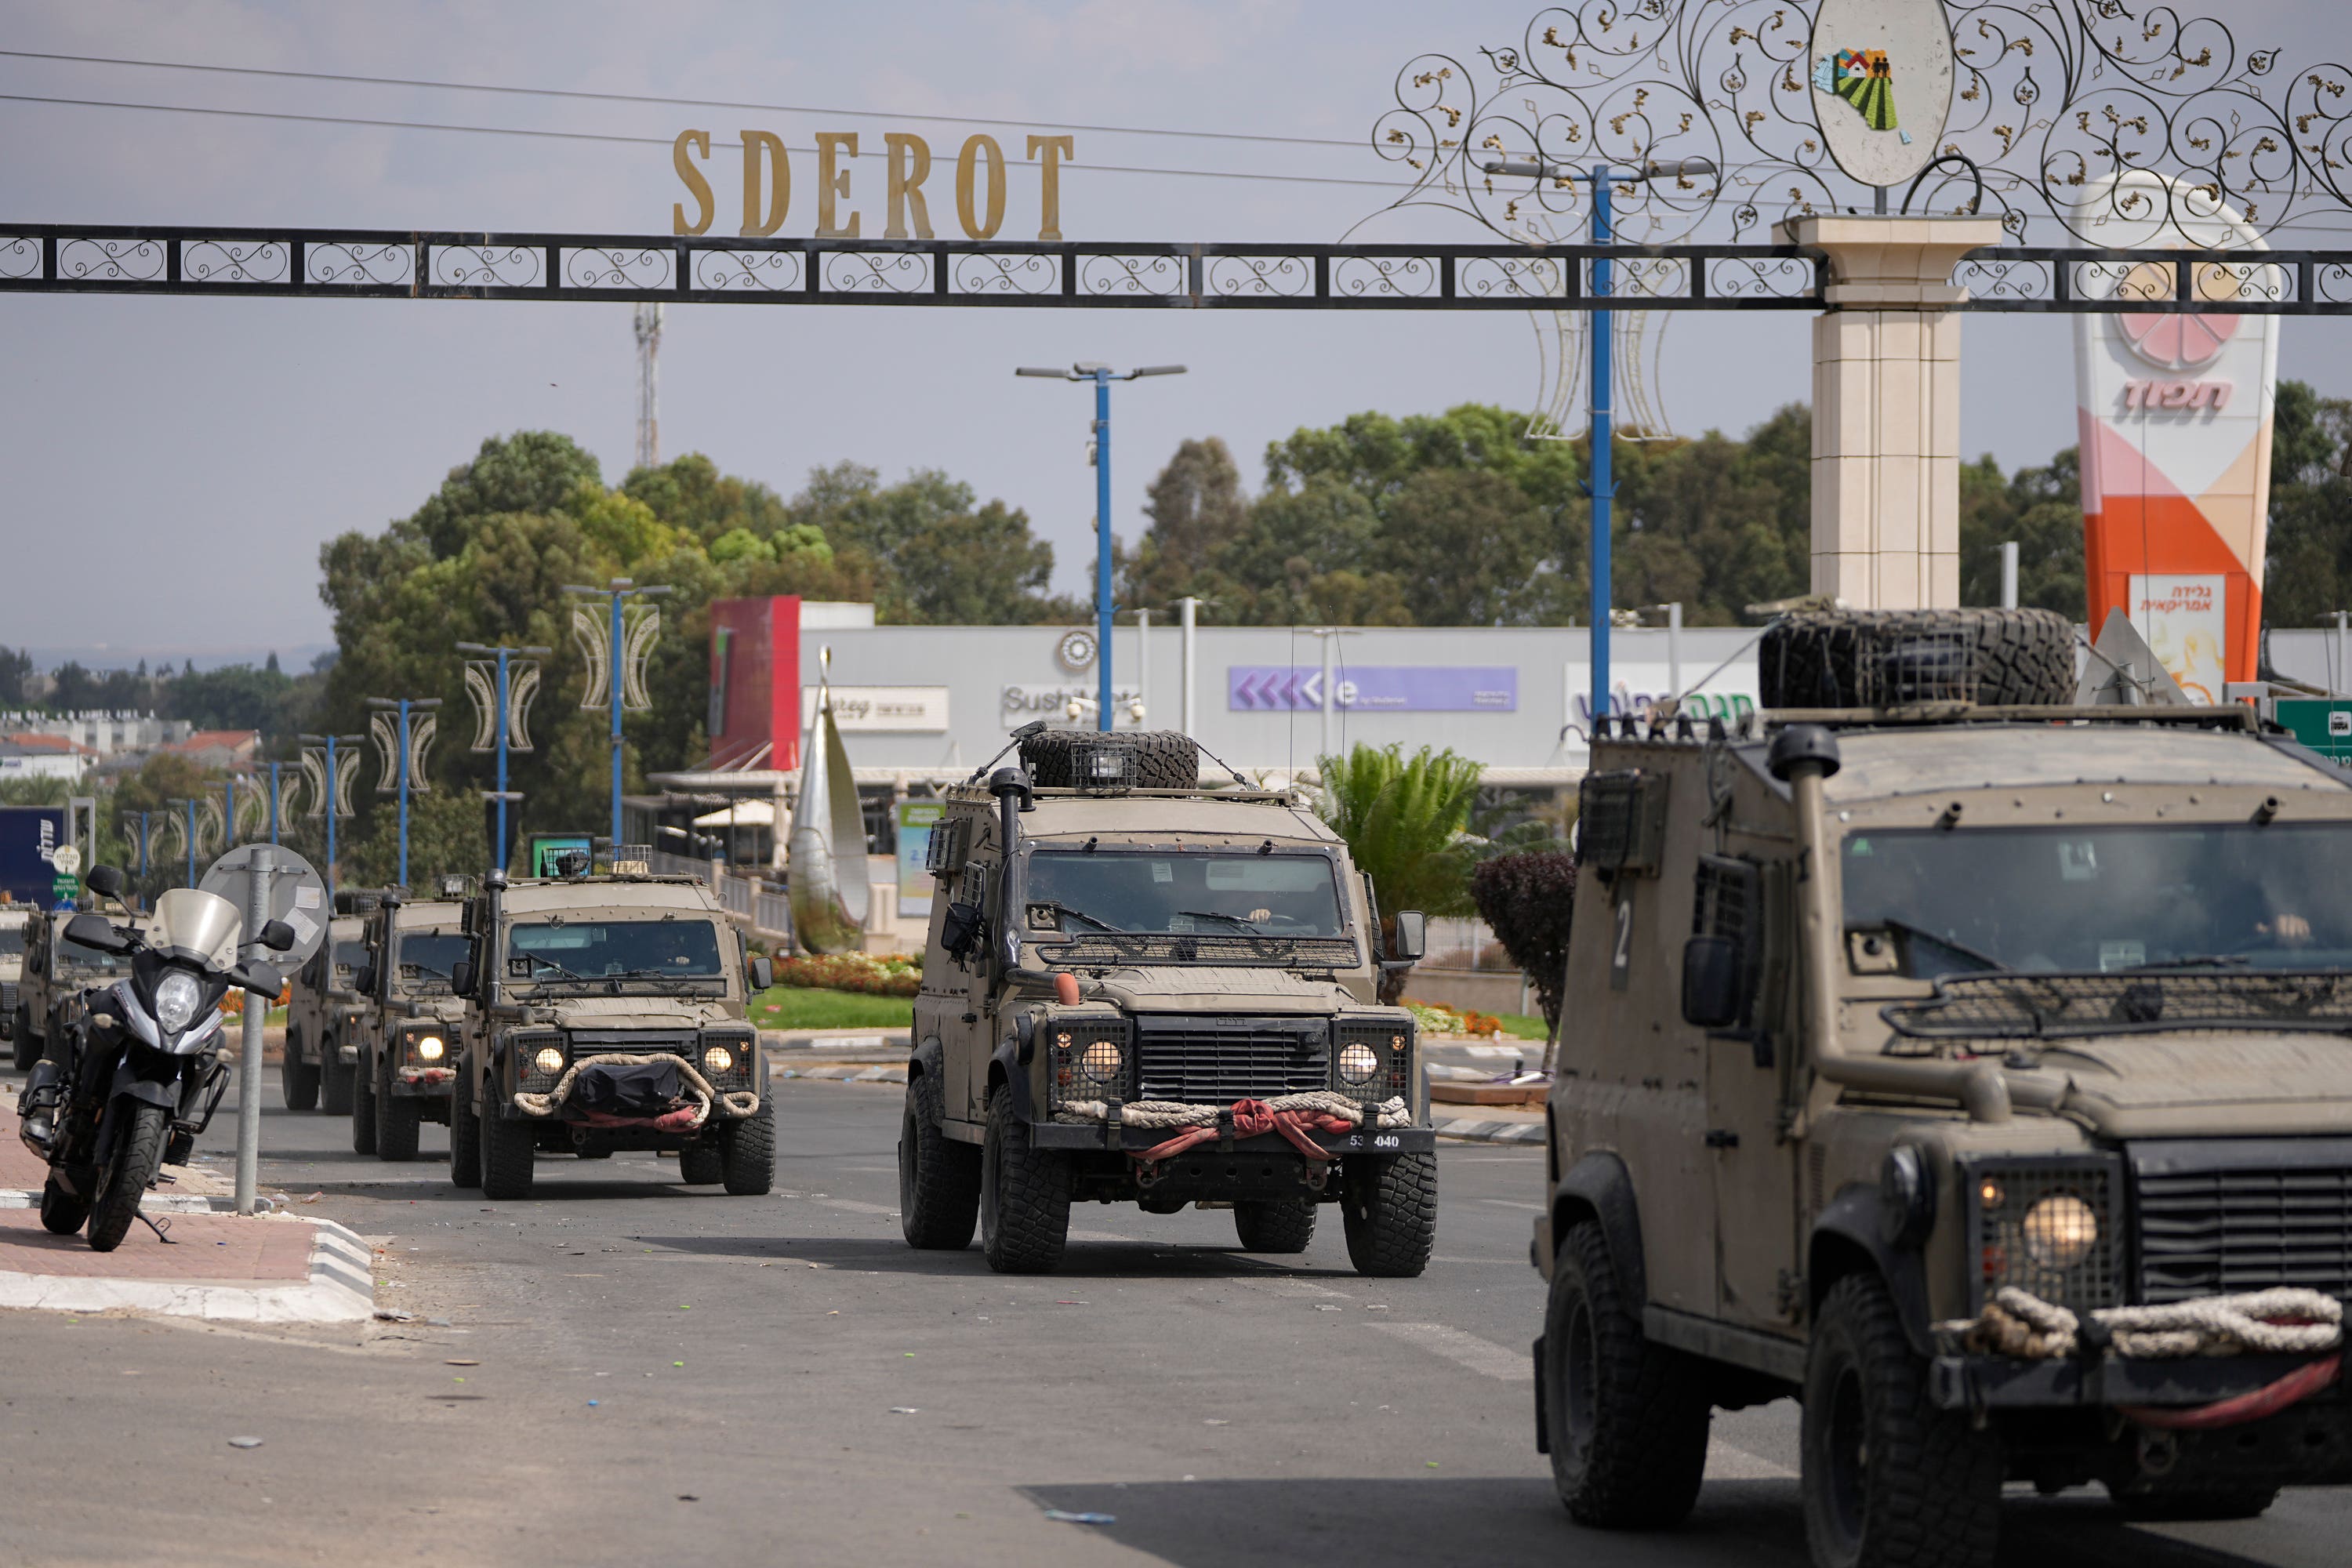 An Israeli army column was deployed to Sderot, a town close to the Gaza Strip.